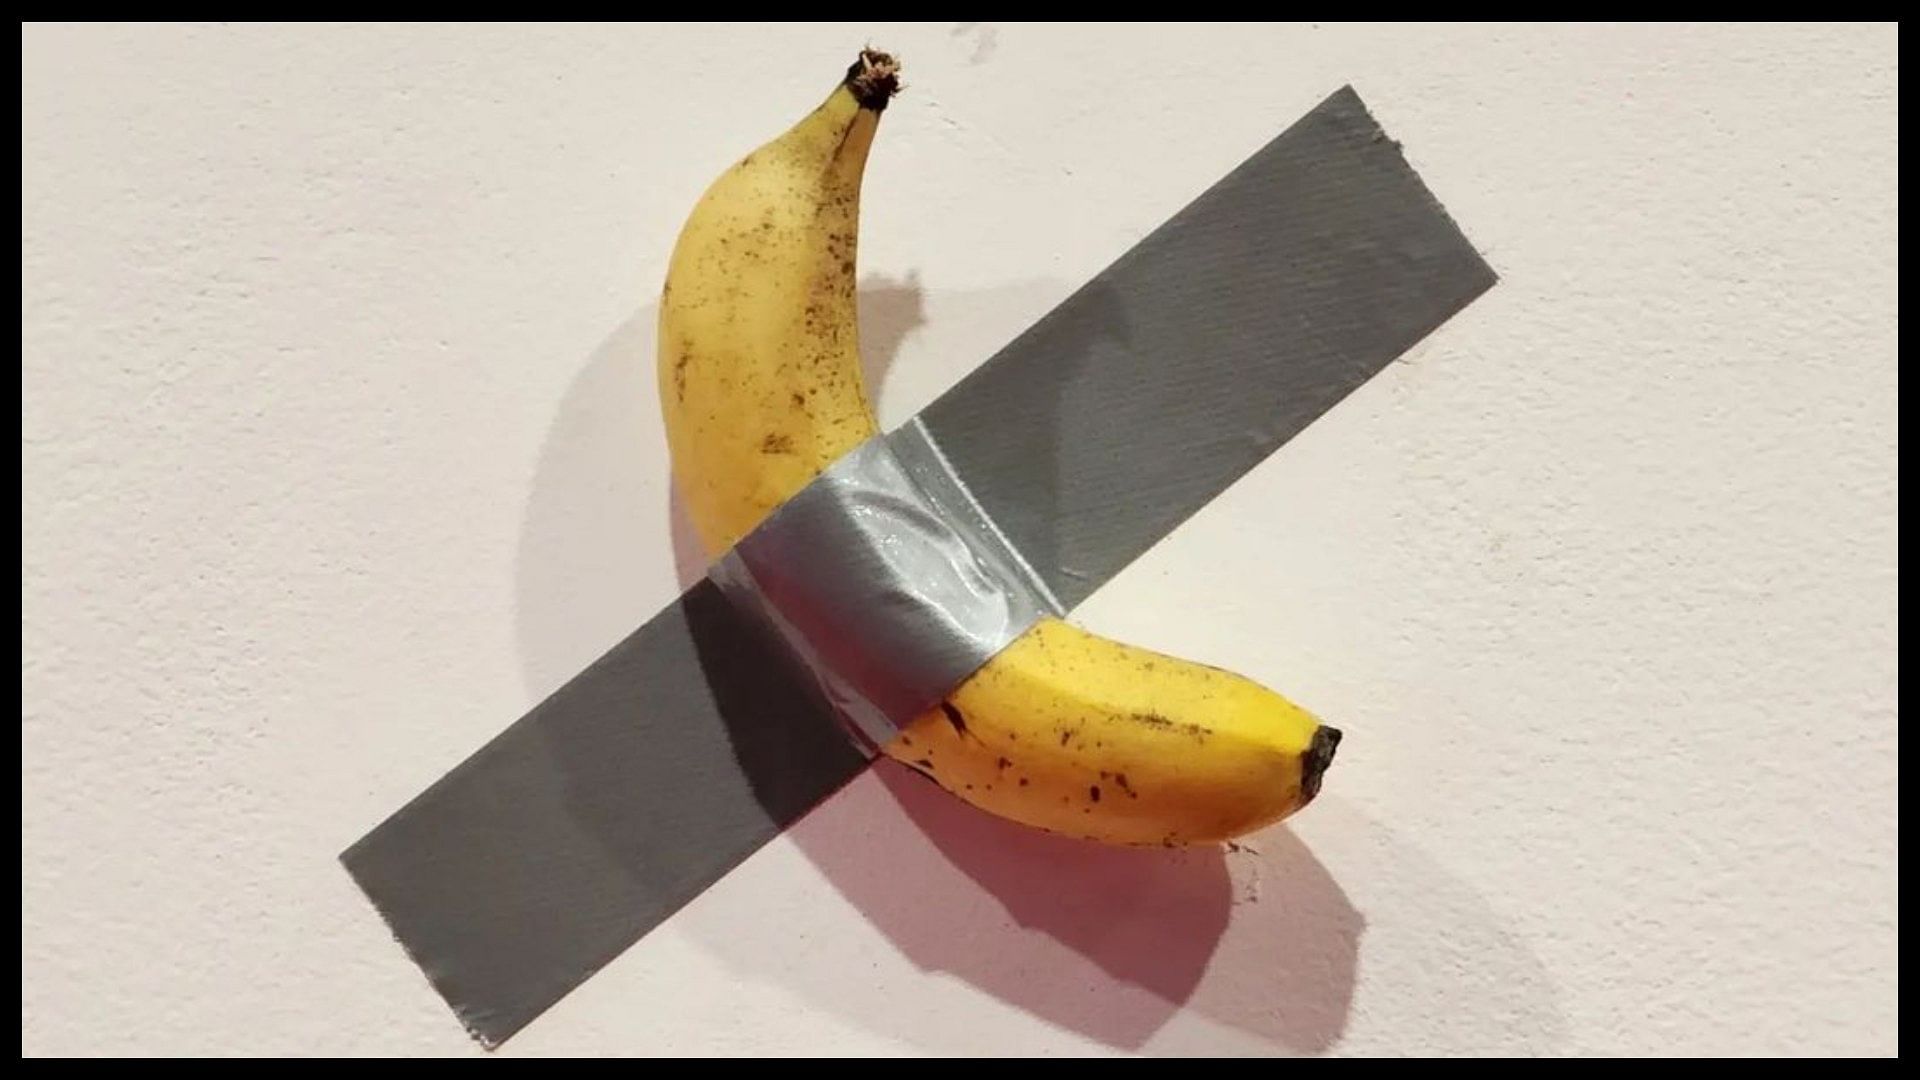 A student who came to visit the museum ate a banana worth Rs 1 crore kept there video viral on social media